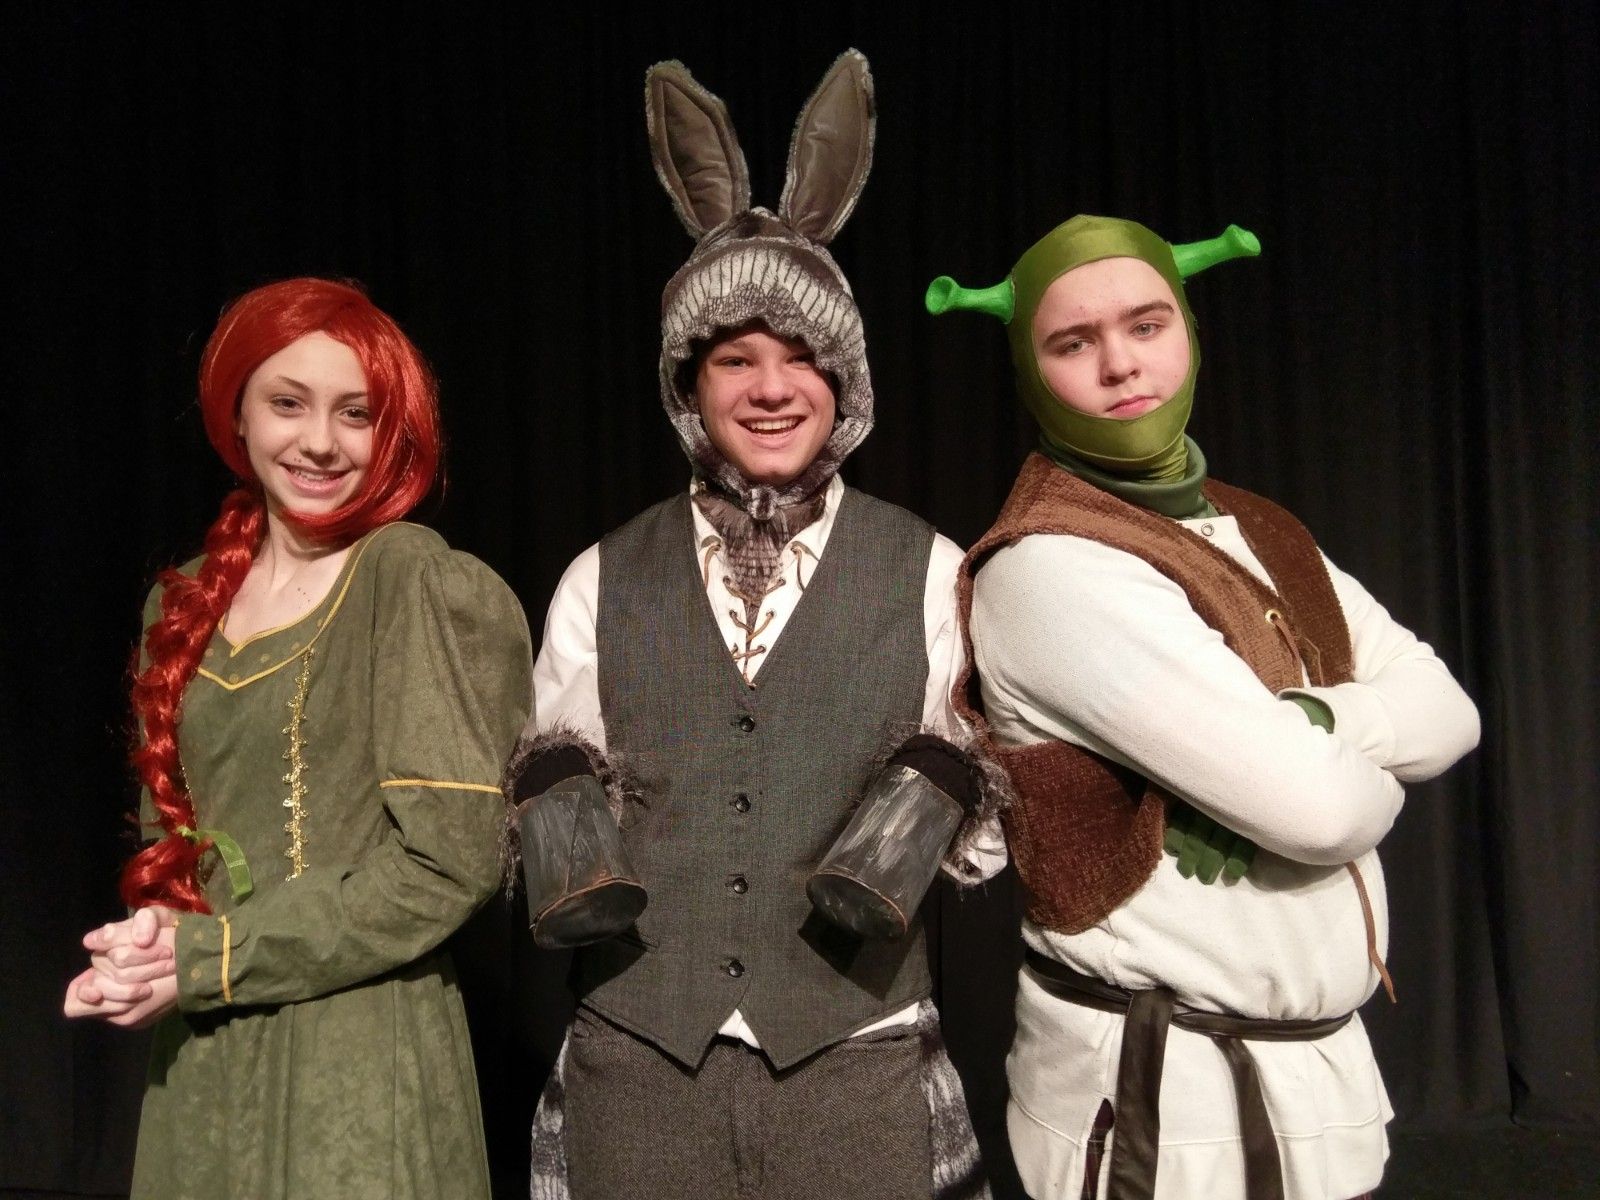 Shrek the Musical Jr. presented by Majestic Theatre. Manchester